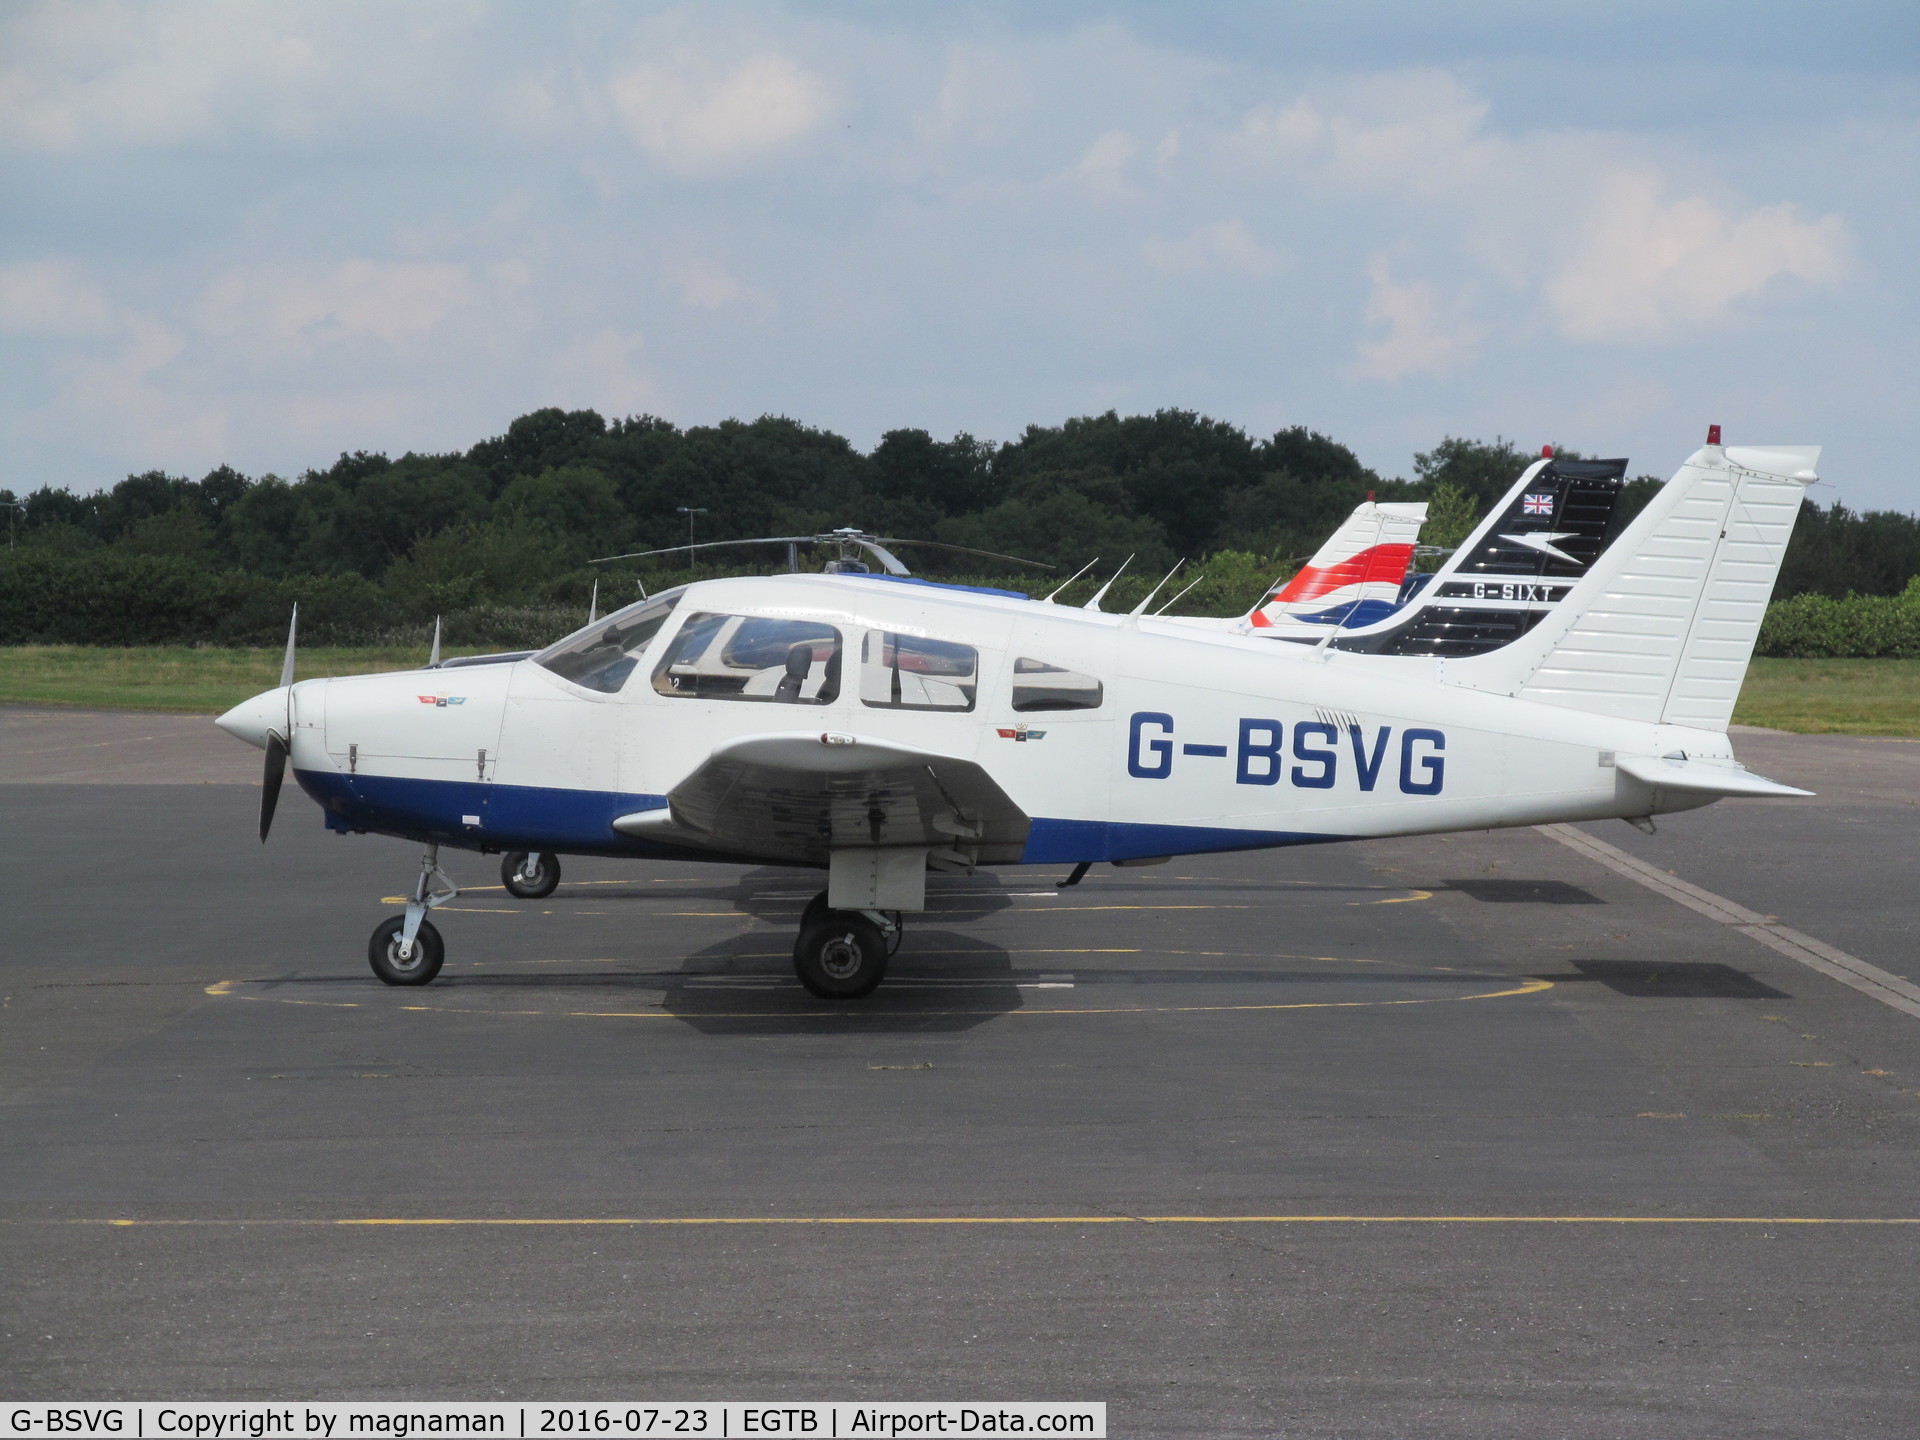 G-BSVG, 1984 Piper PA-28-161 Cherokee Warrior II C/N 28-8516013, on apron at booker